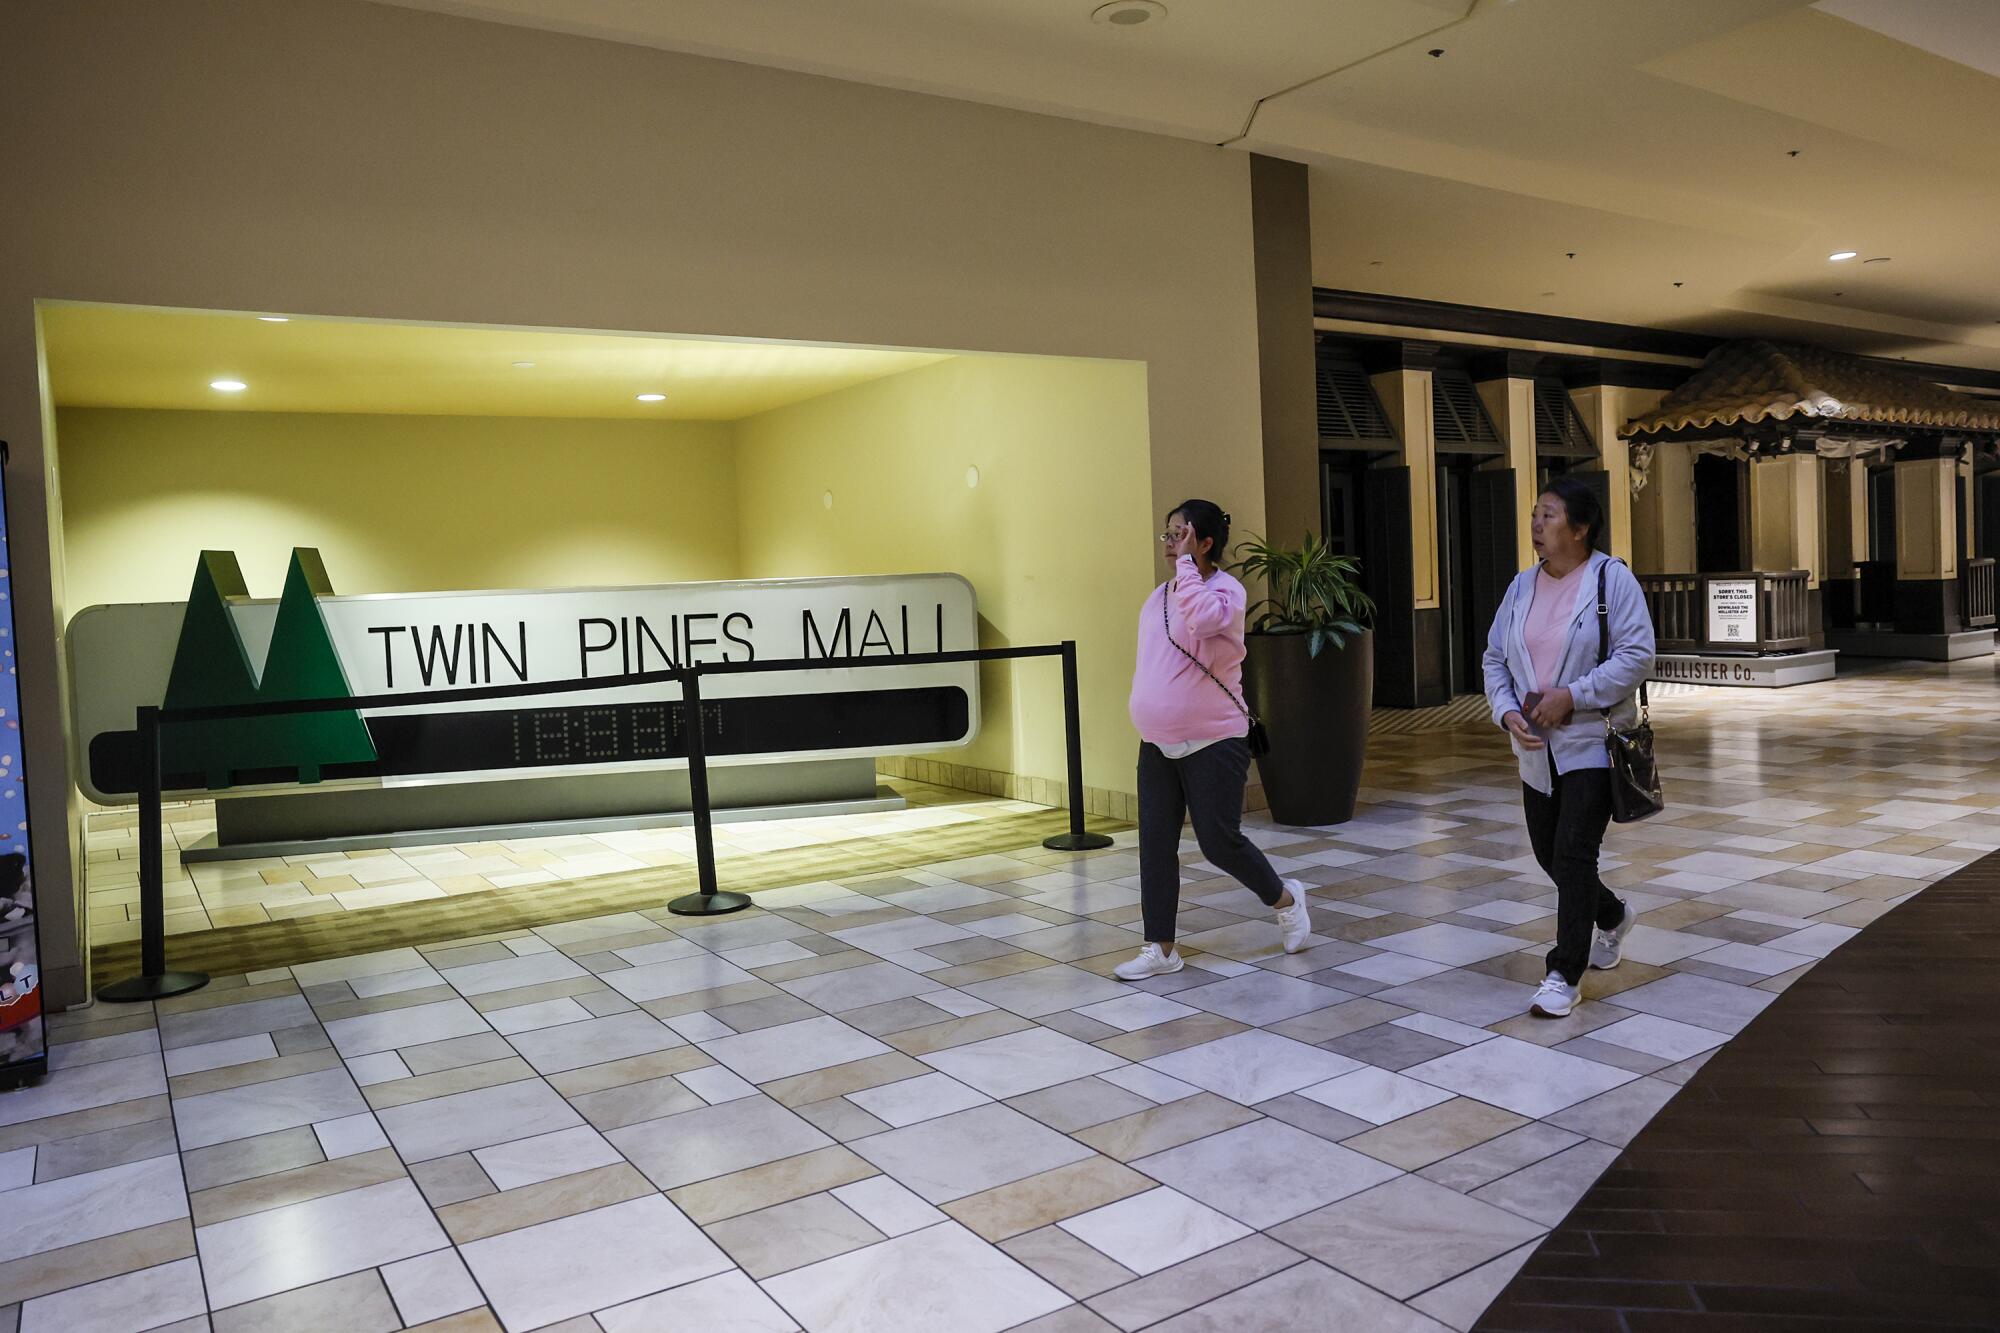 Shoppers at the Puente Hills Mall stroll past a prop from the movie "Back to the Future," which was filmed here.